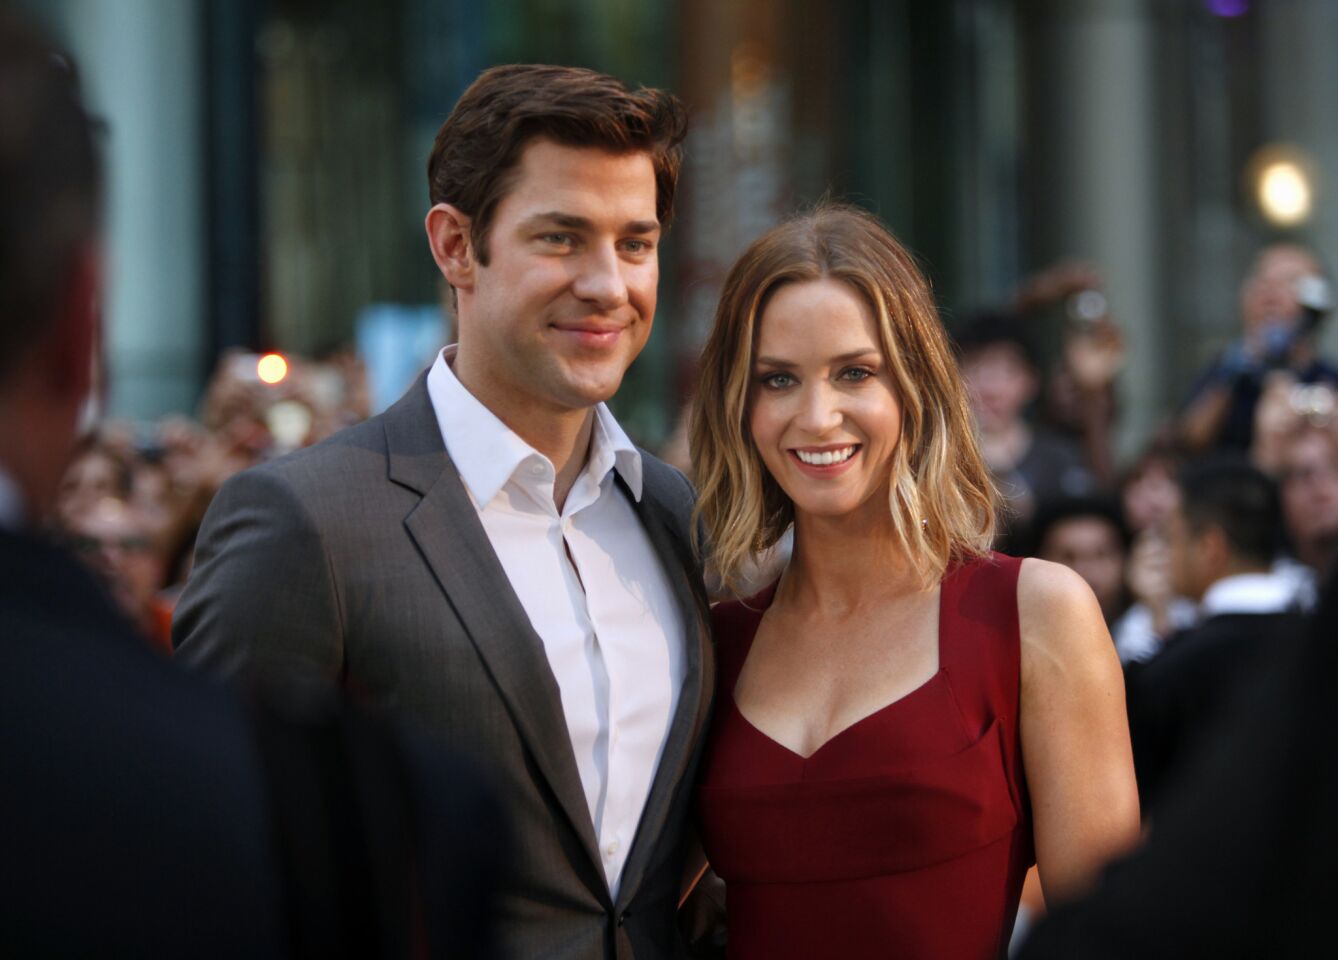 "The Office" alum John Krasinski and "The Devil Wears Prada" actress Emily Blunt have welcomed their first child together. "Wanted to let the news out directly," Krasinski tweeted. "Emily and I are so incredibly happy to welcome our daughter Hazel into the world today! Happy bday!" The couple are stronger than ever. "I feel like everyone pooh-poohs actor relationships because they say they always end in divorce and tears," Blunt told The Times in April 2012. "But that's only because it's in the news and it's broadcast to the world. "John and I can talk about everything, and it's nice, because we have a very deep understanding of what the other person does," Blunt added.